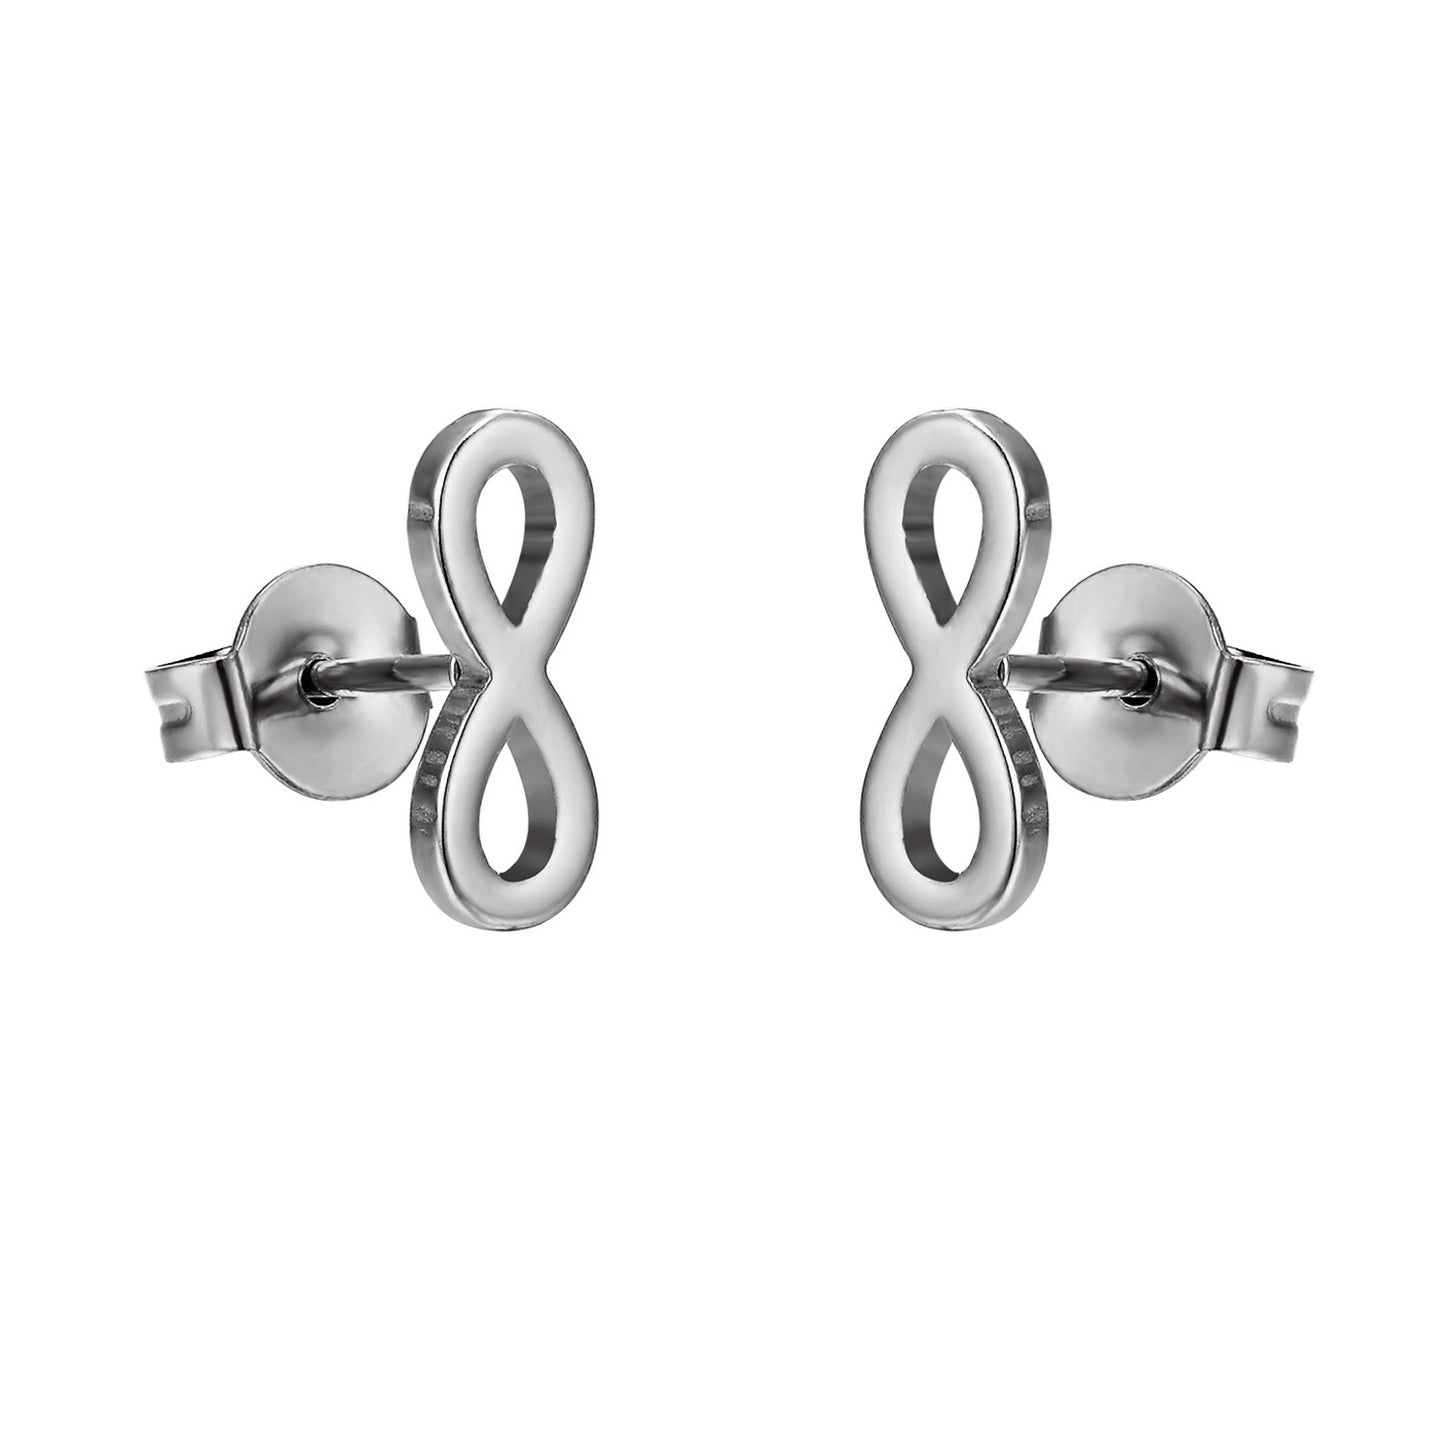 Infinity Design Earrings Silver Tone 11mm Womens Stainless Steel Classy Studs